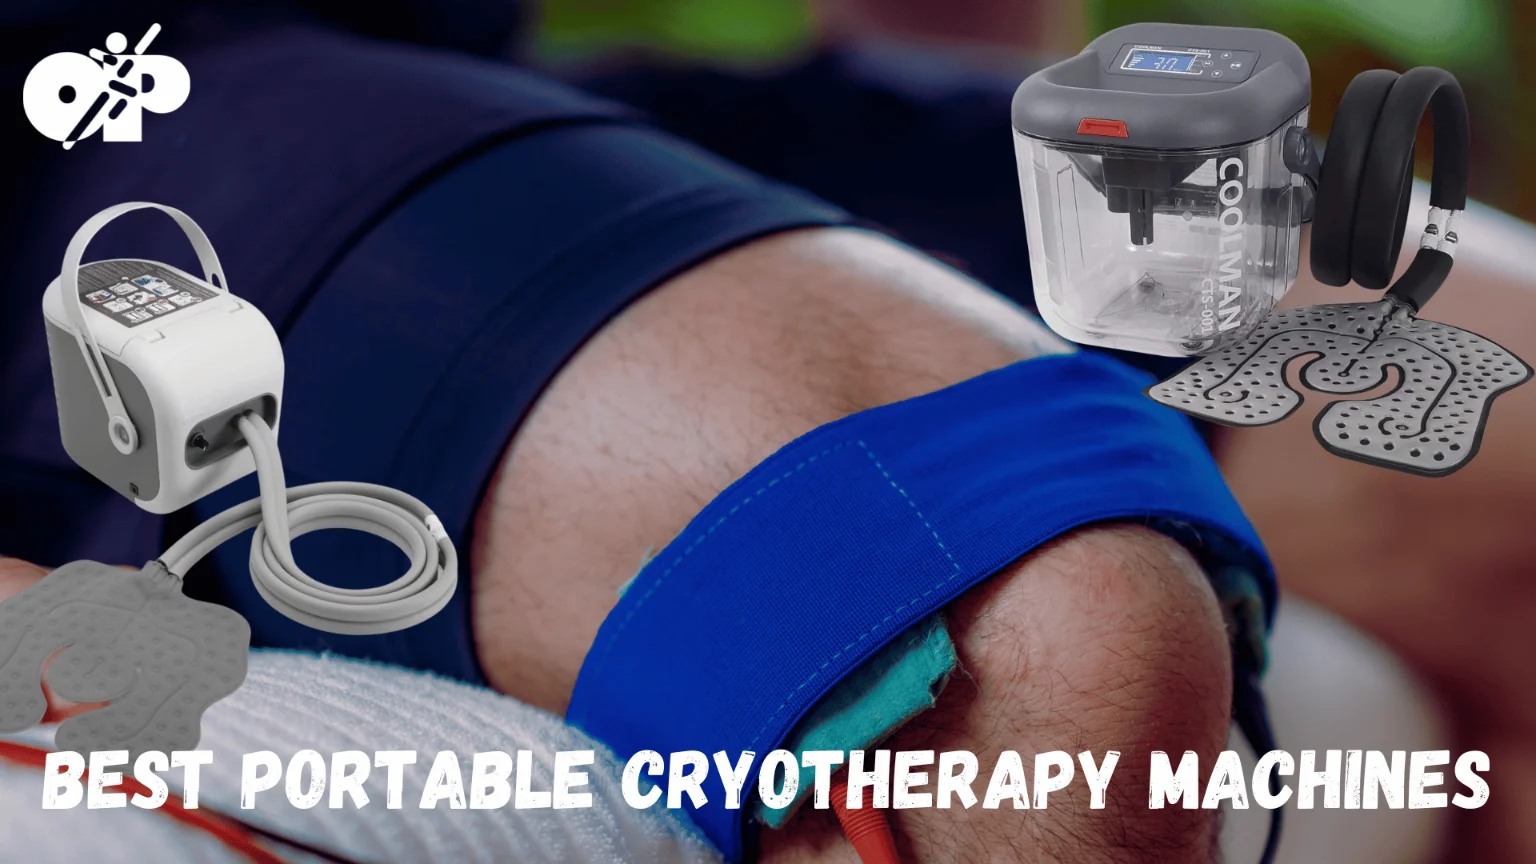 Best PORTABLE CRYOTHERAPY MACHINES